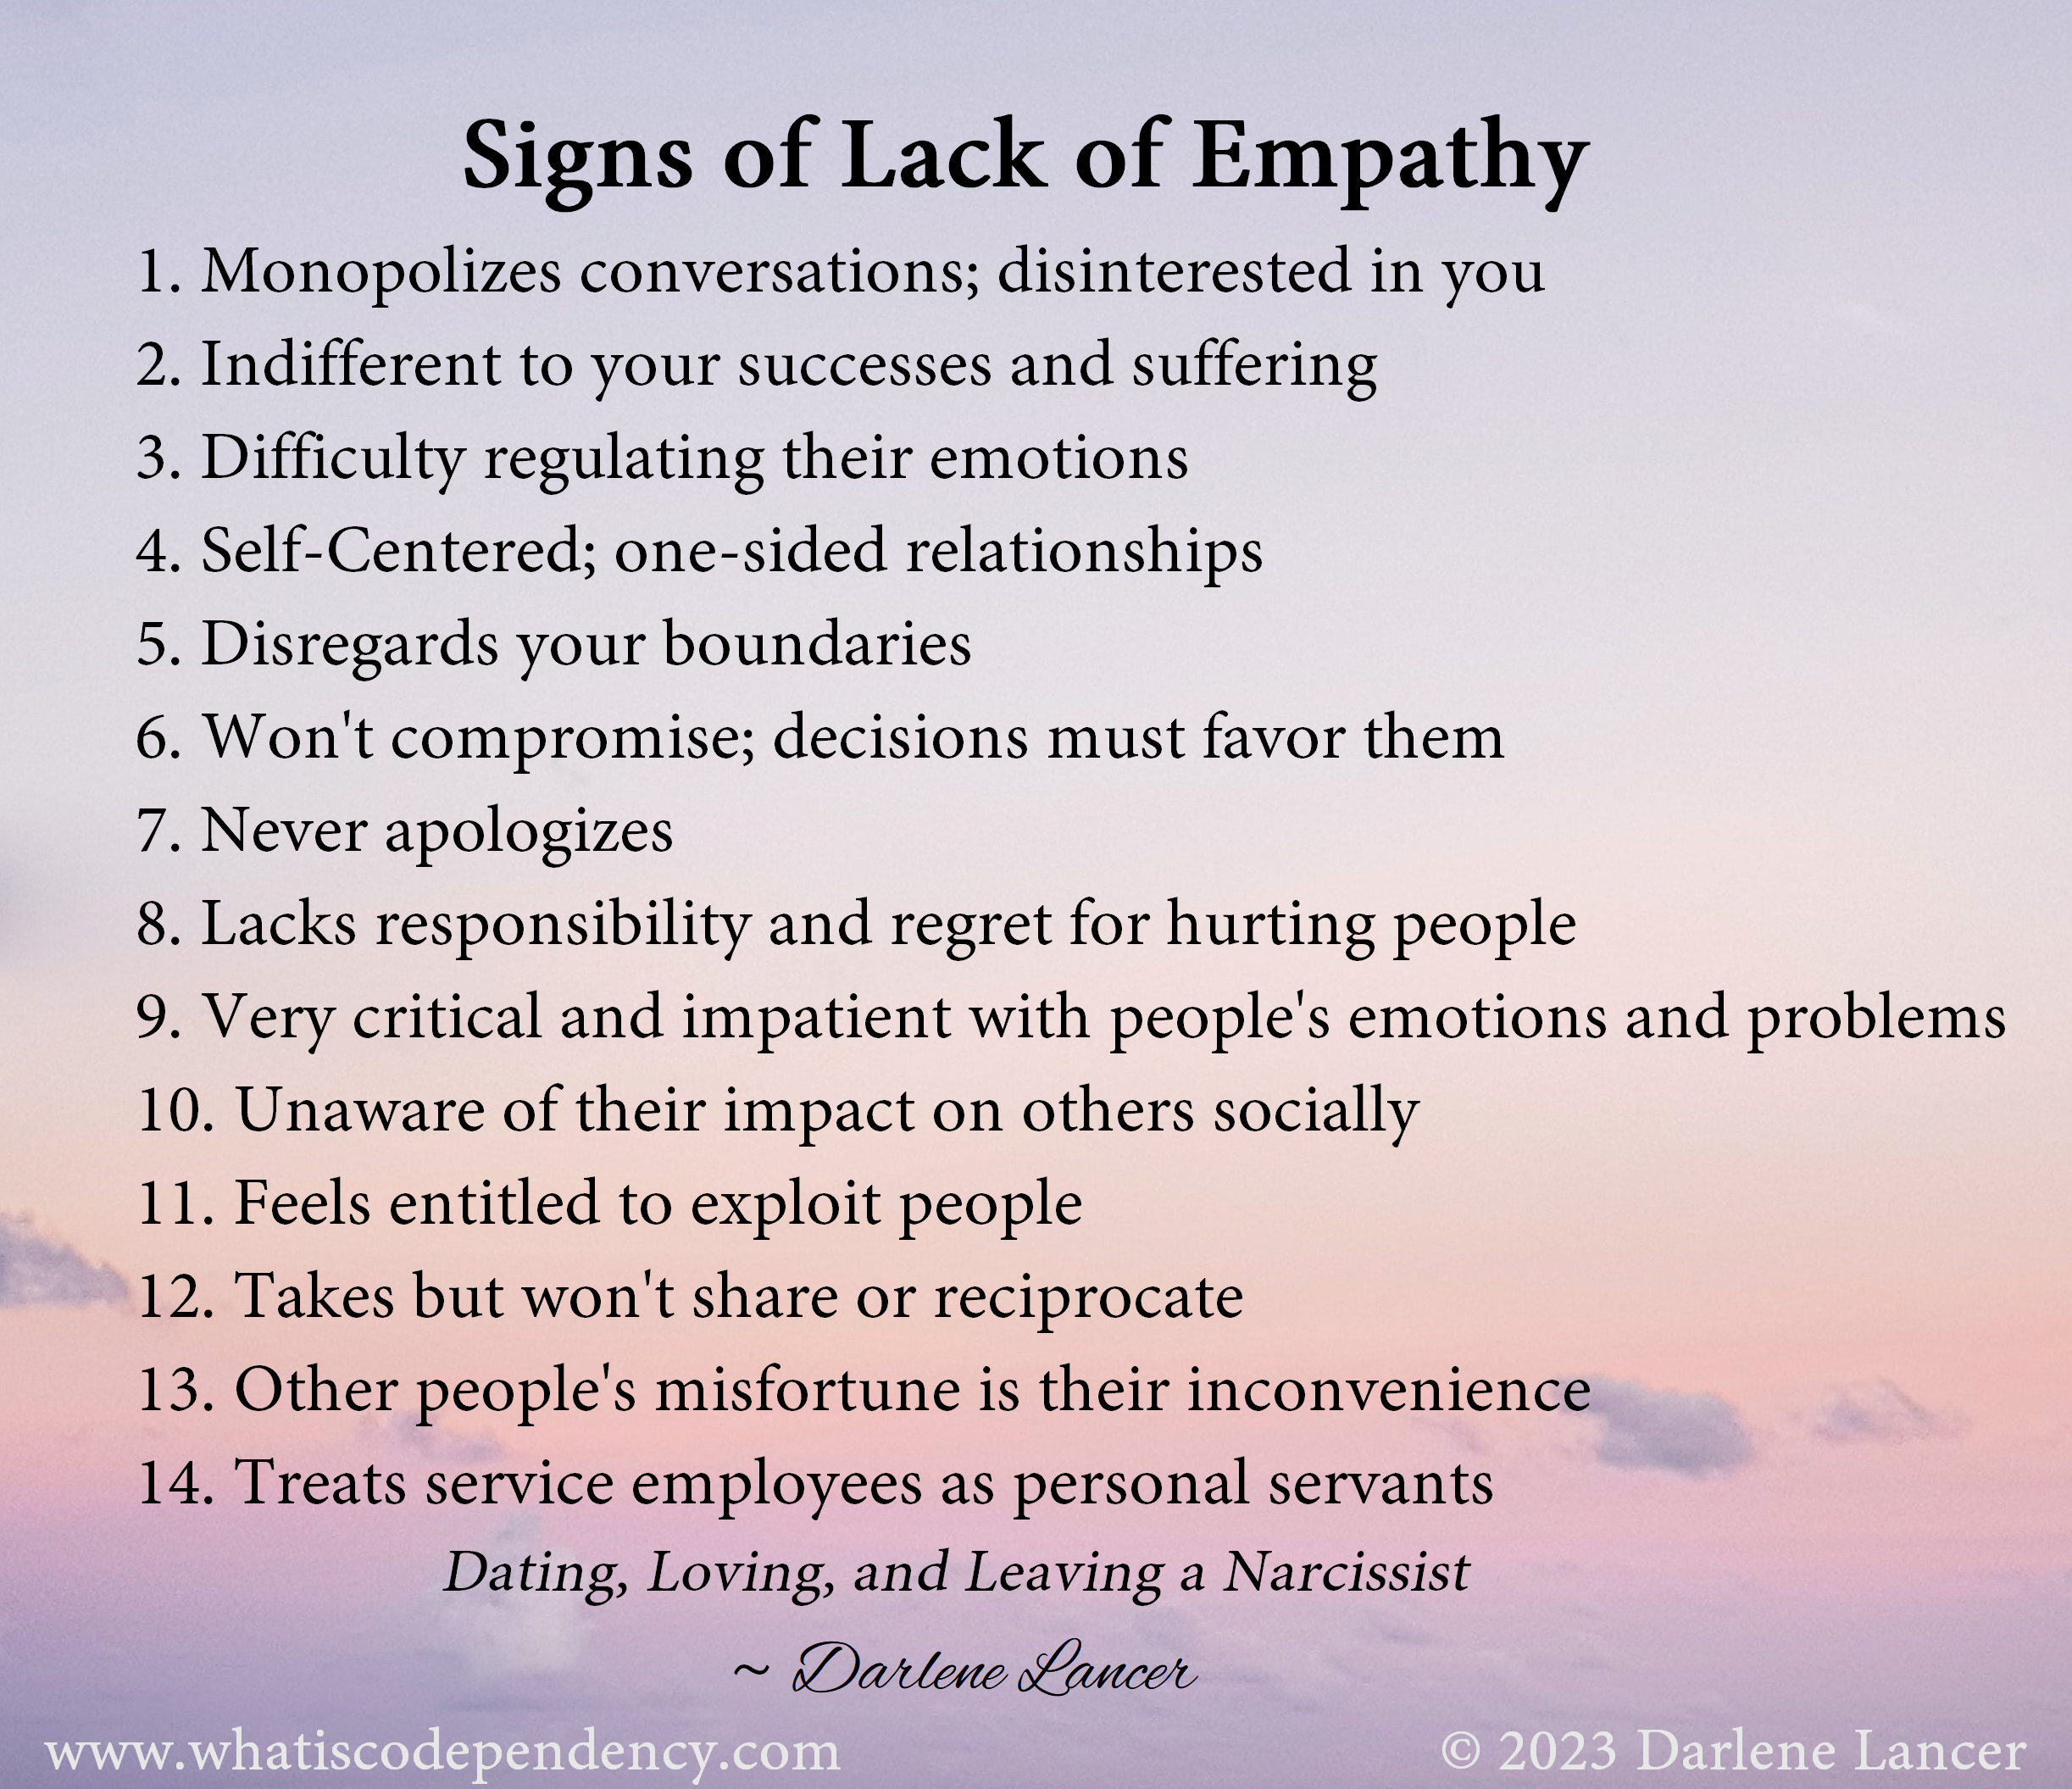 Signs of Lack of Empathy and What You Can Do